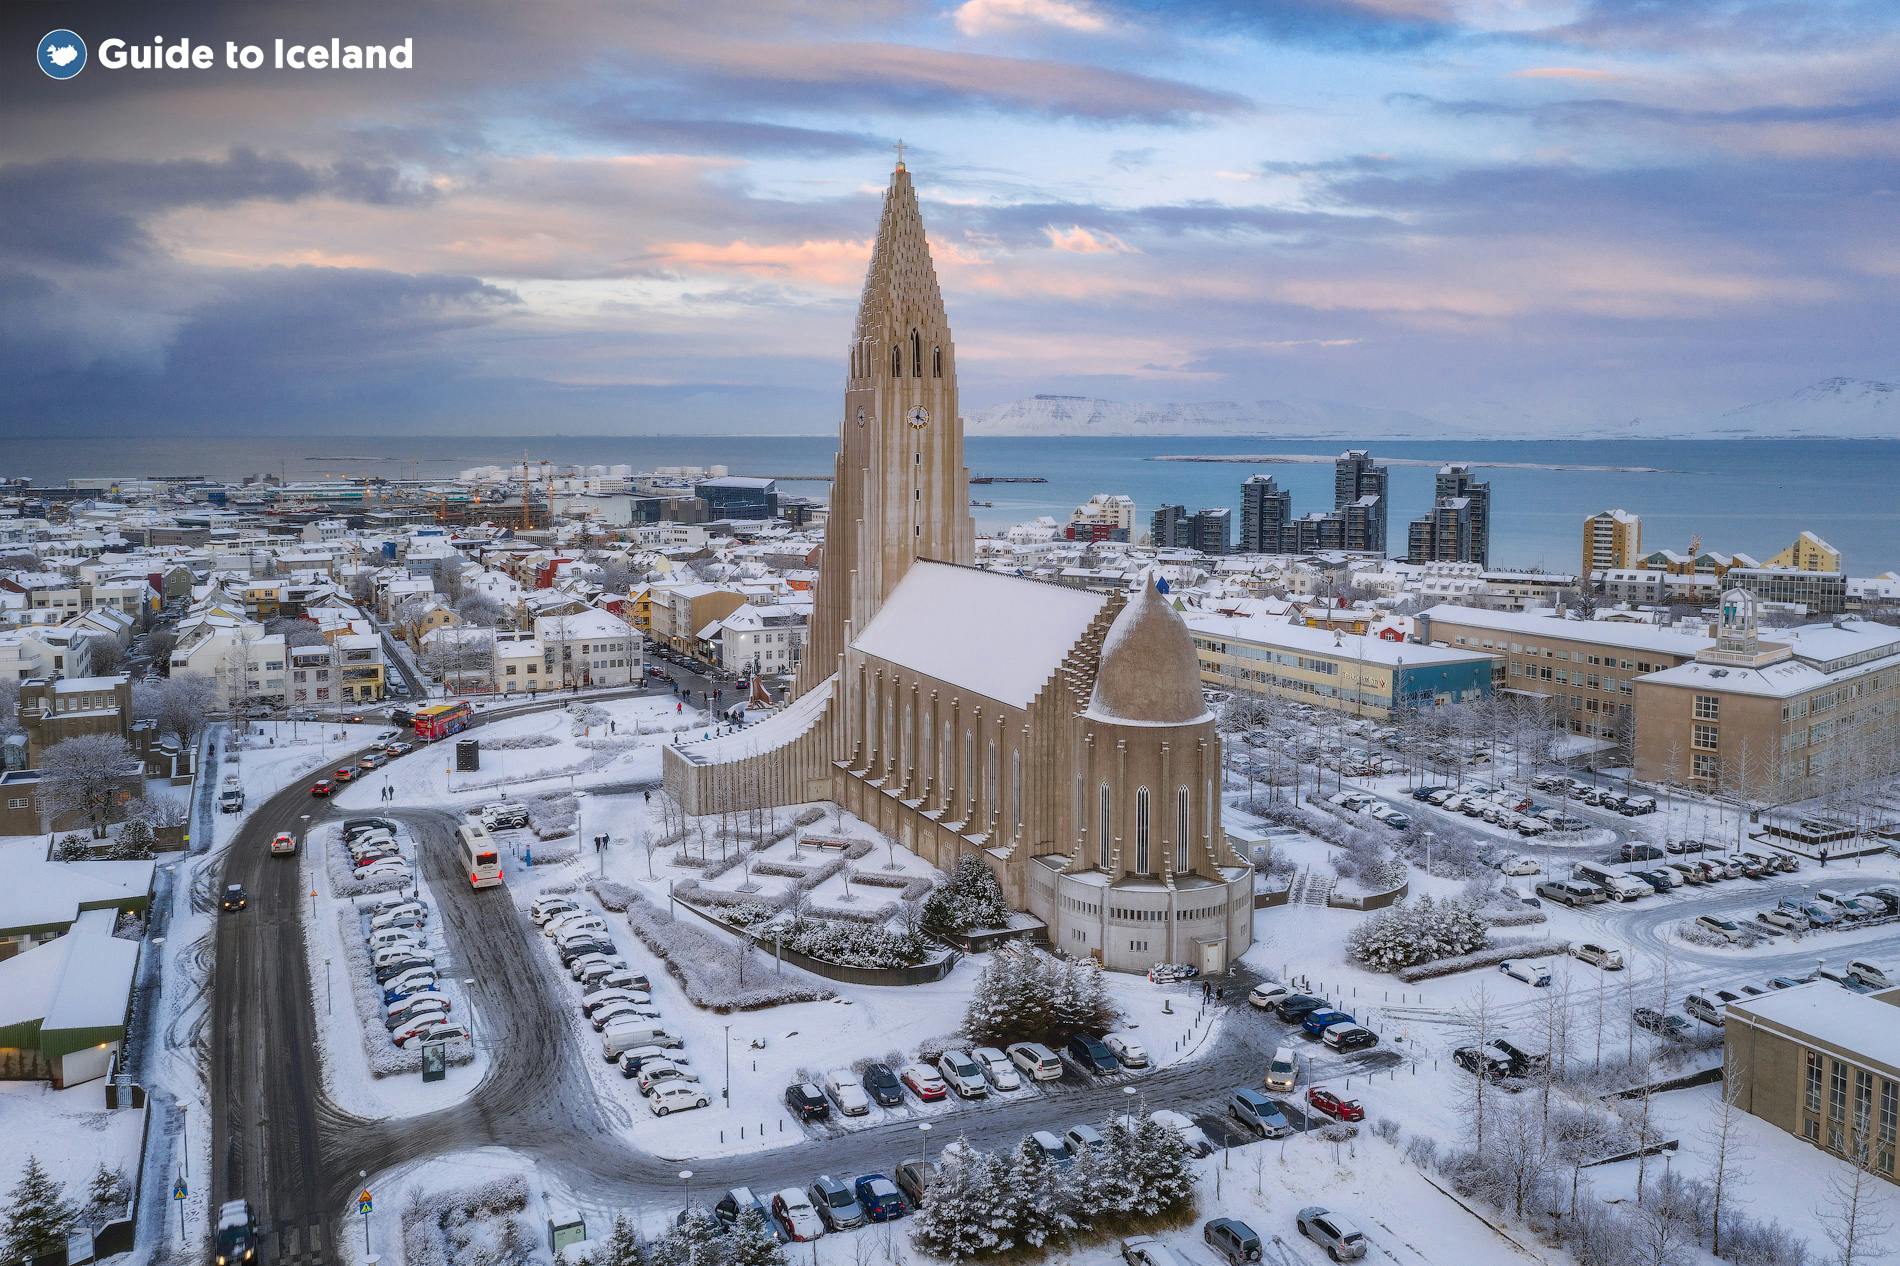 5 Day Northern Lights Winter Vacation with the Golden Circle, South Coast, Reykjavik & Blue Lagoon - day 4